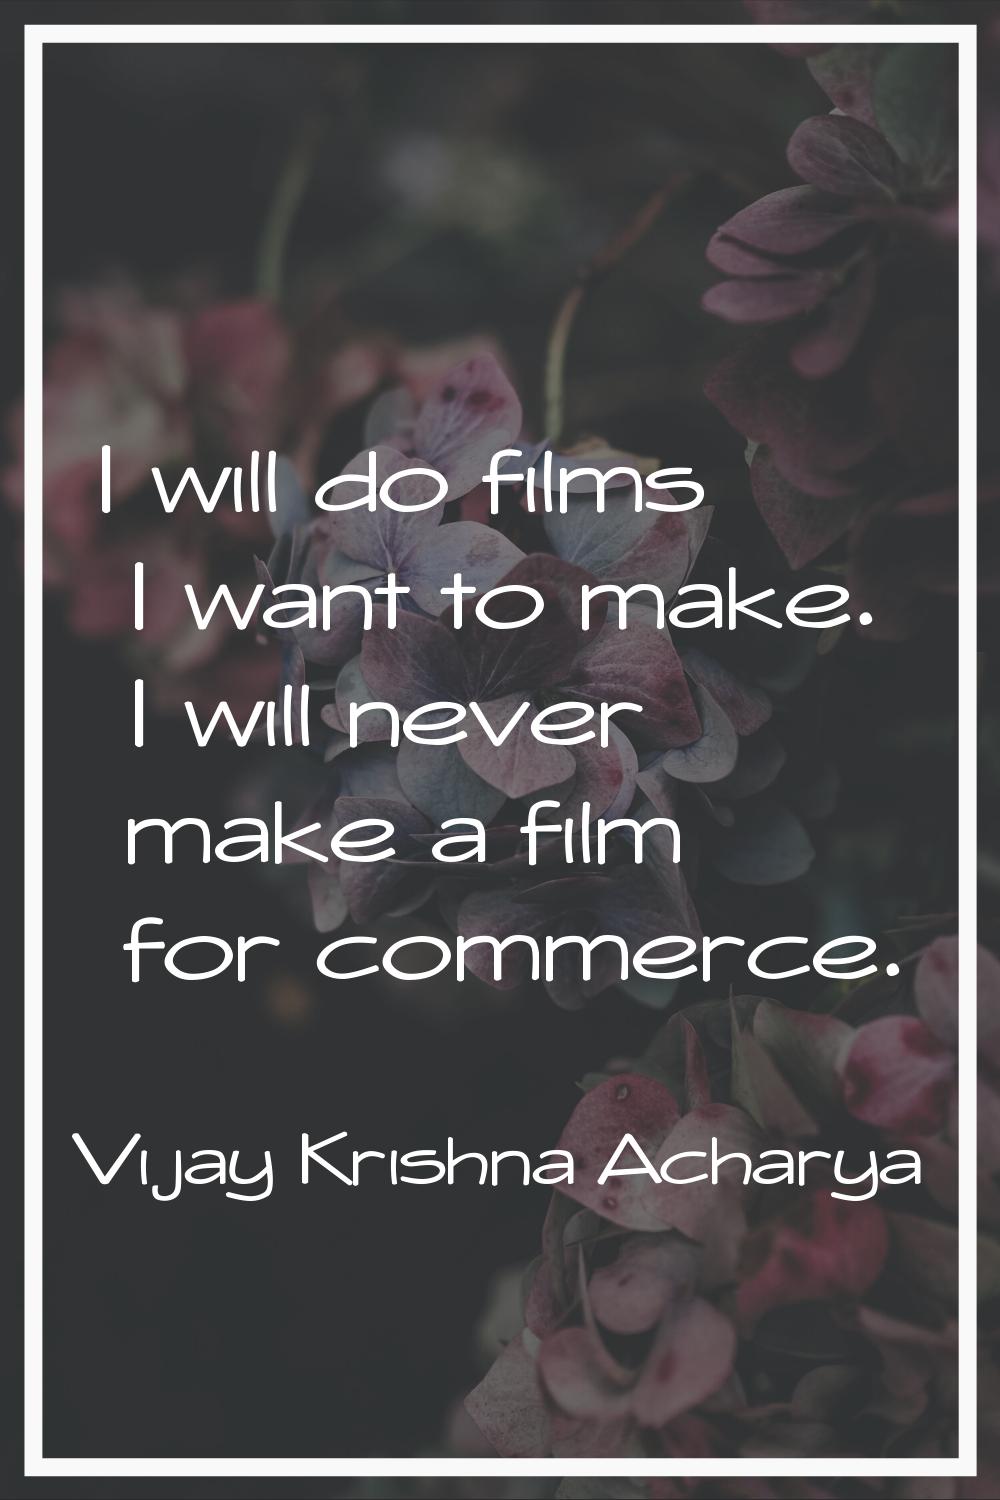 I will do films I want to make. I will never make a film for commerce.